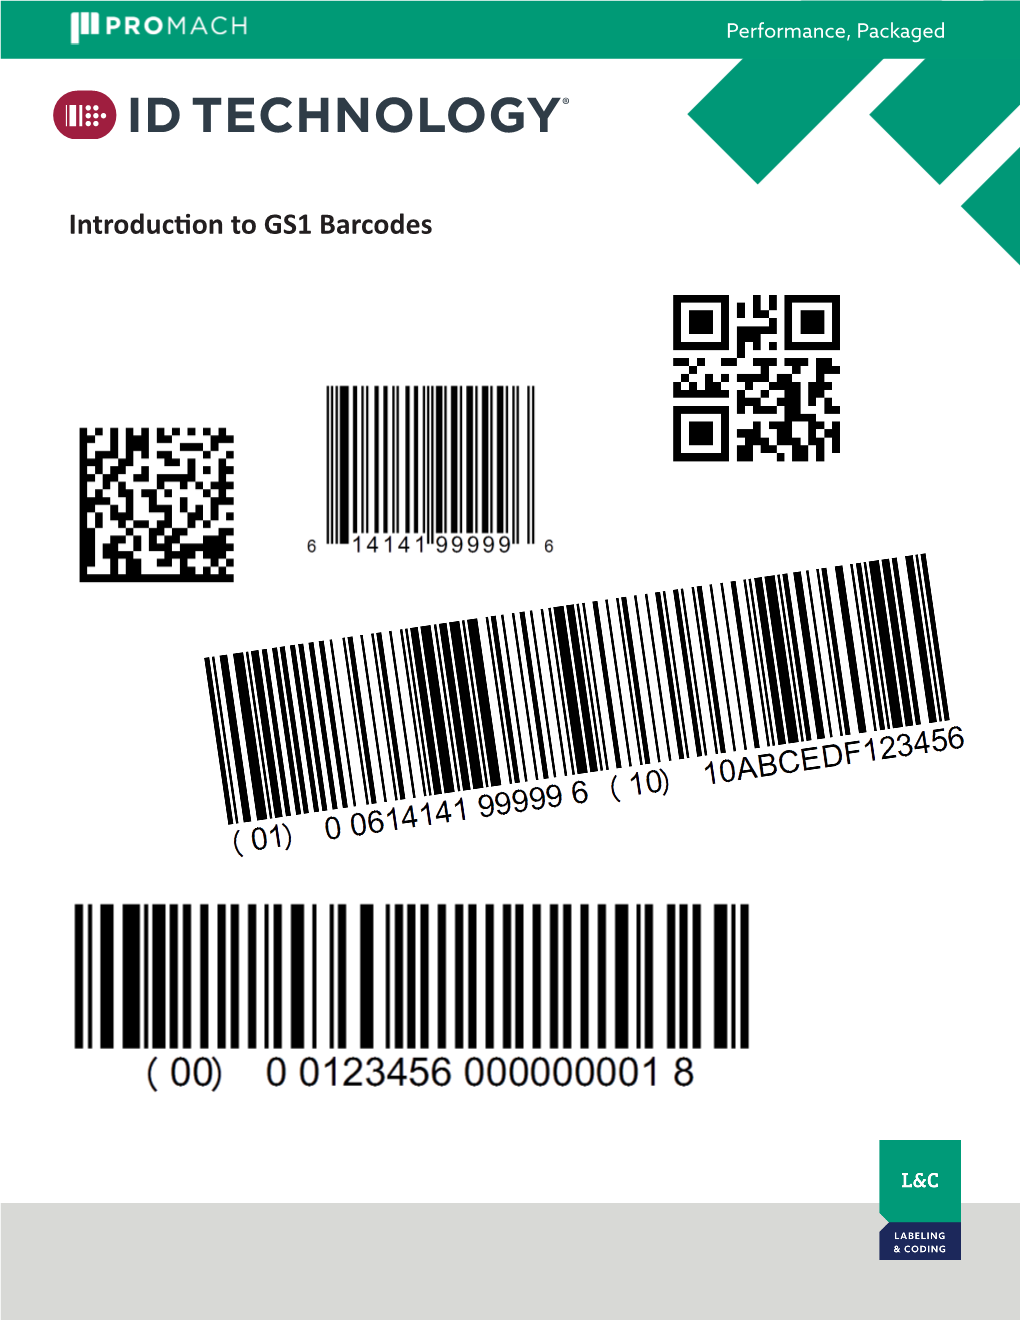 Introduction to GS1 Barcodes Contents